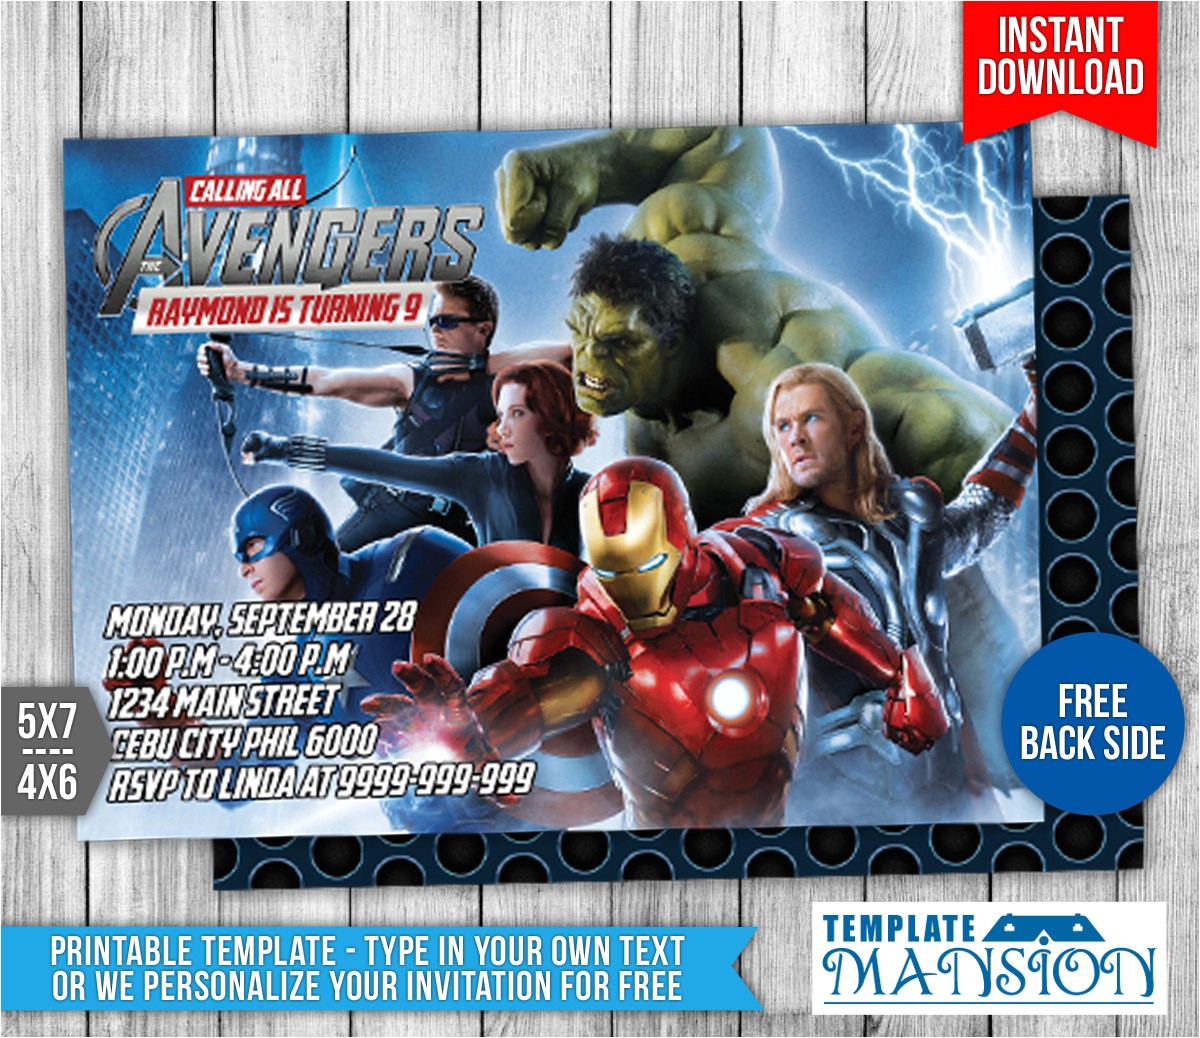 Free Printable Avengers Birthday Party Invitations Avengers Birthday Invitation 1 by Templatemansion On